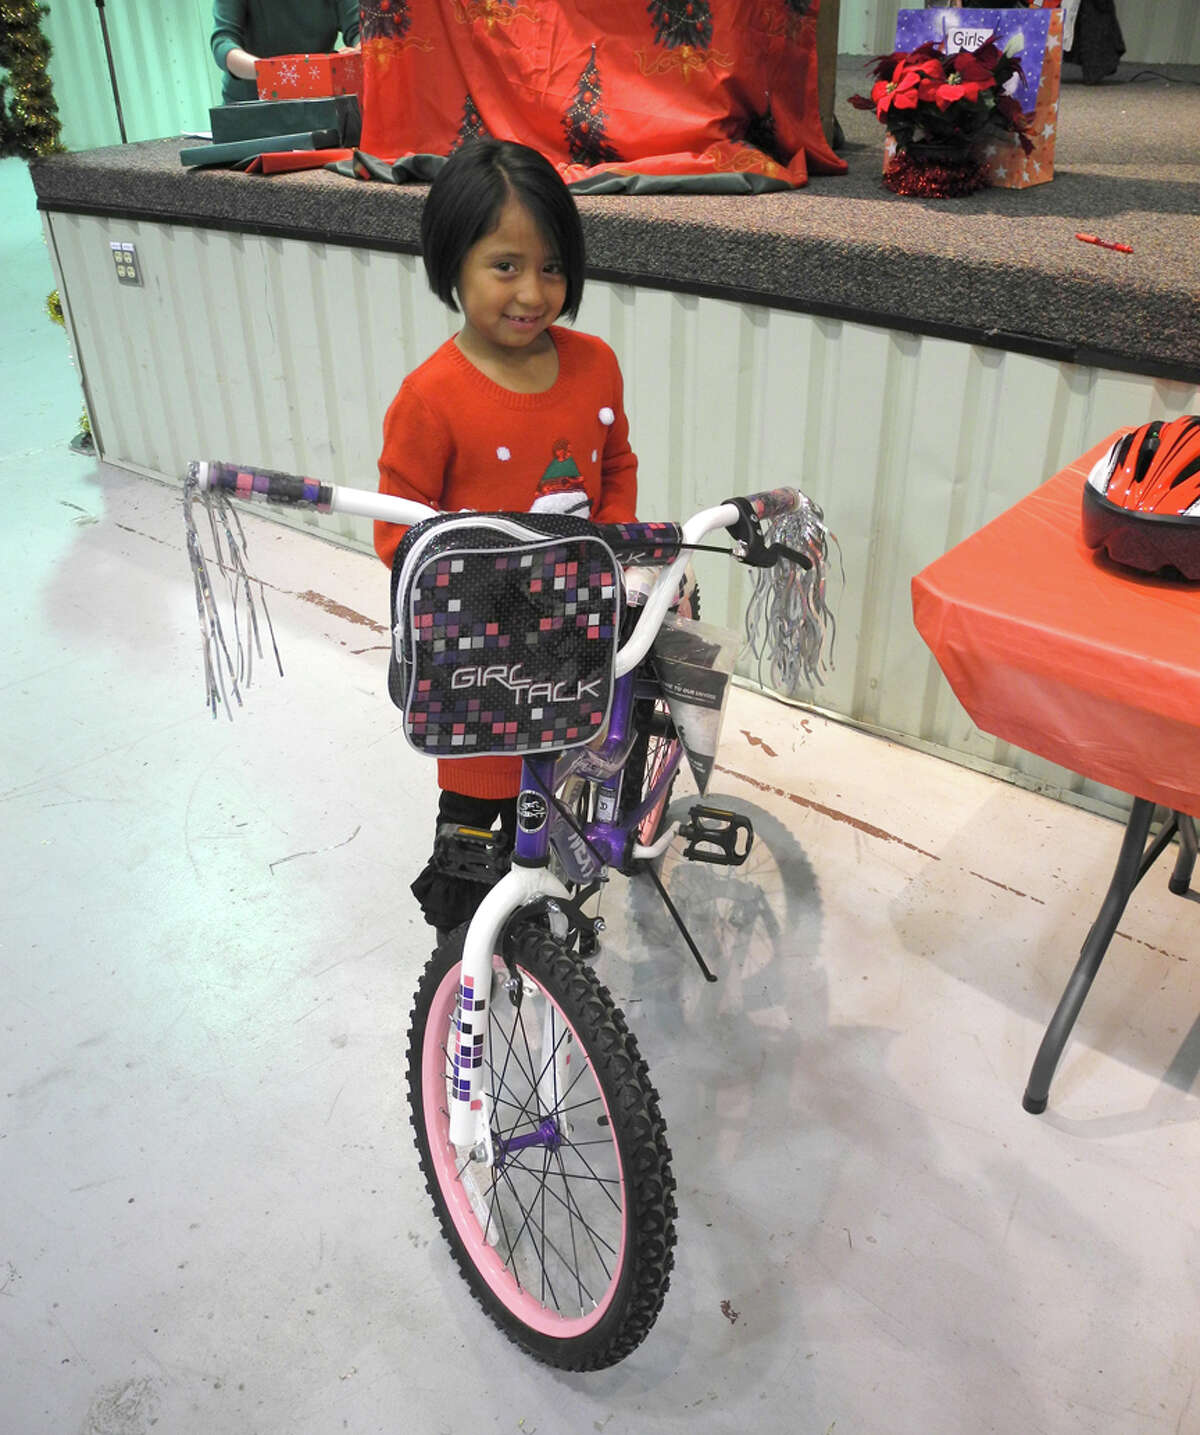 Annalyse Acosta, 7, waits to be fitted for a helmet before she takes home the new bike she won in a drawing at the Ollie Liner Center at Breakfast with Santa Saturday.